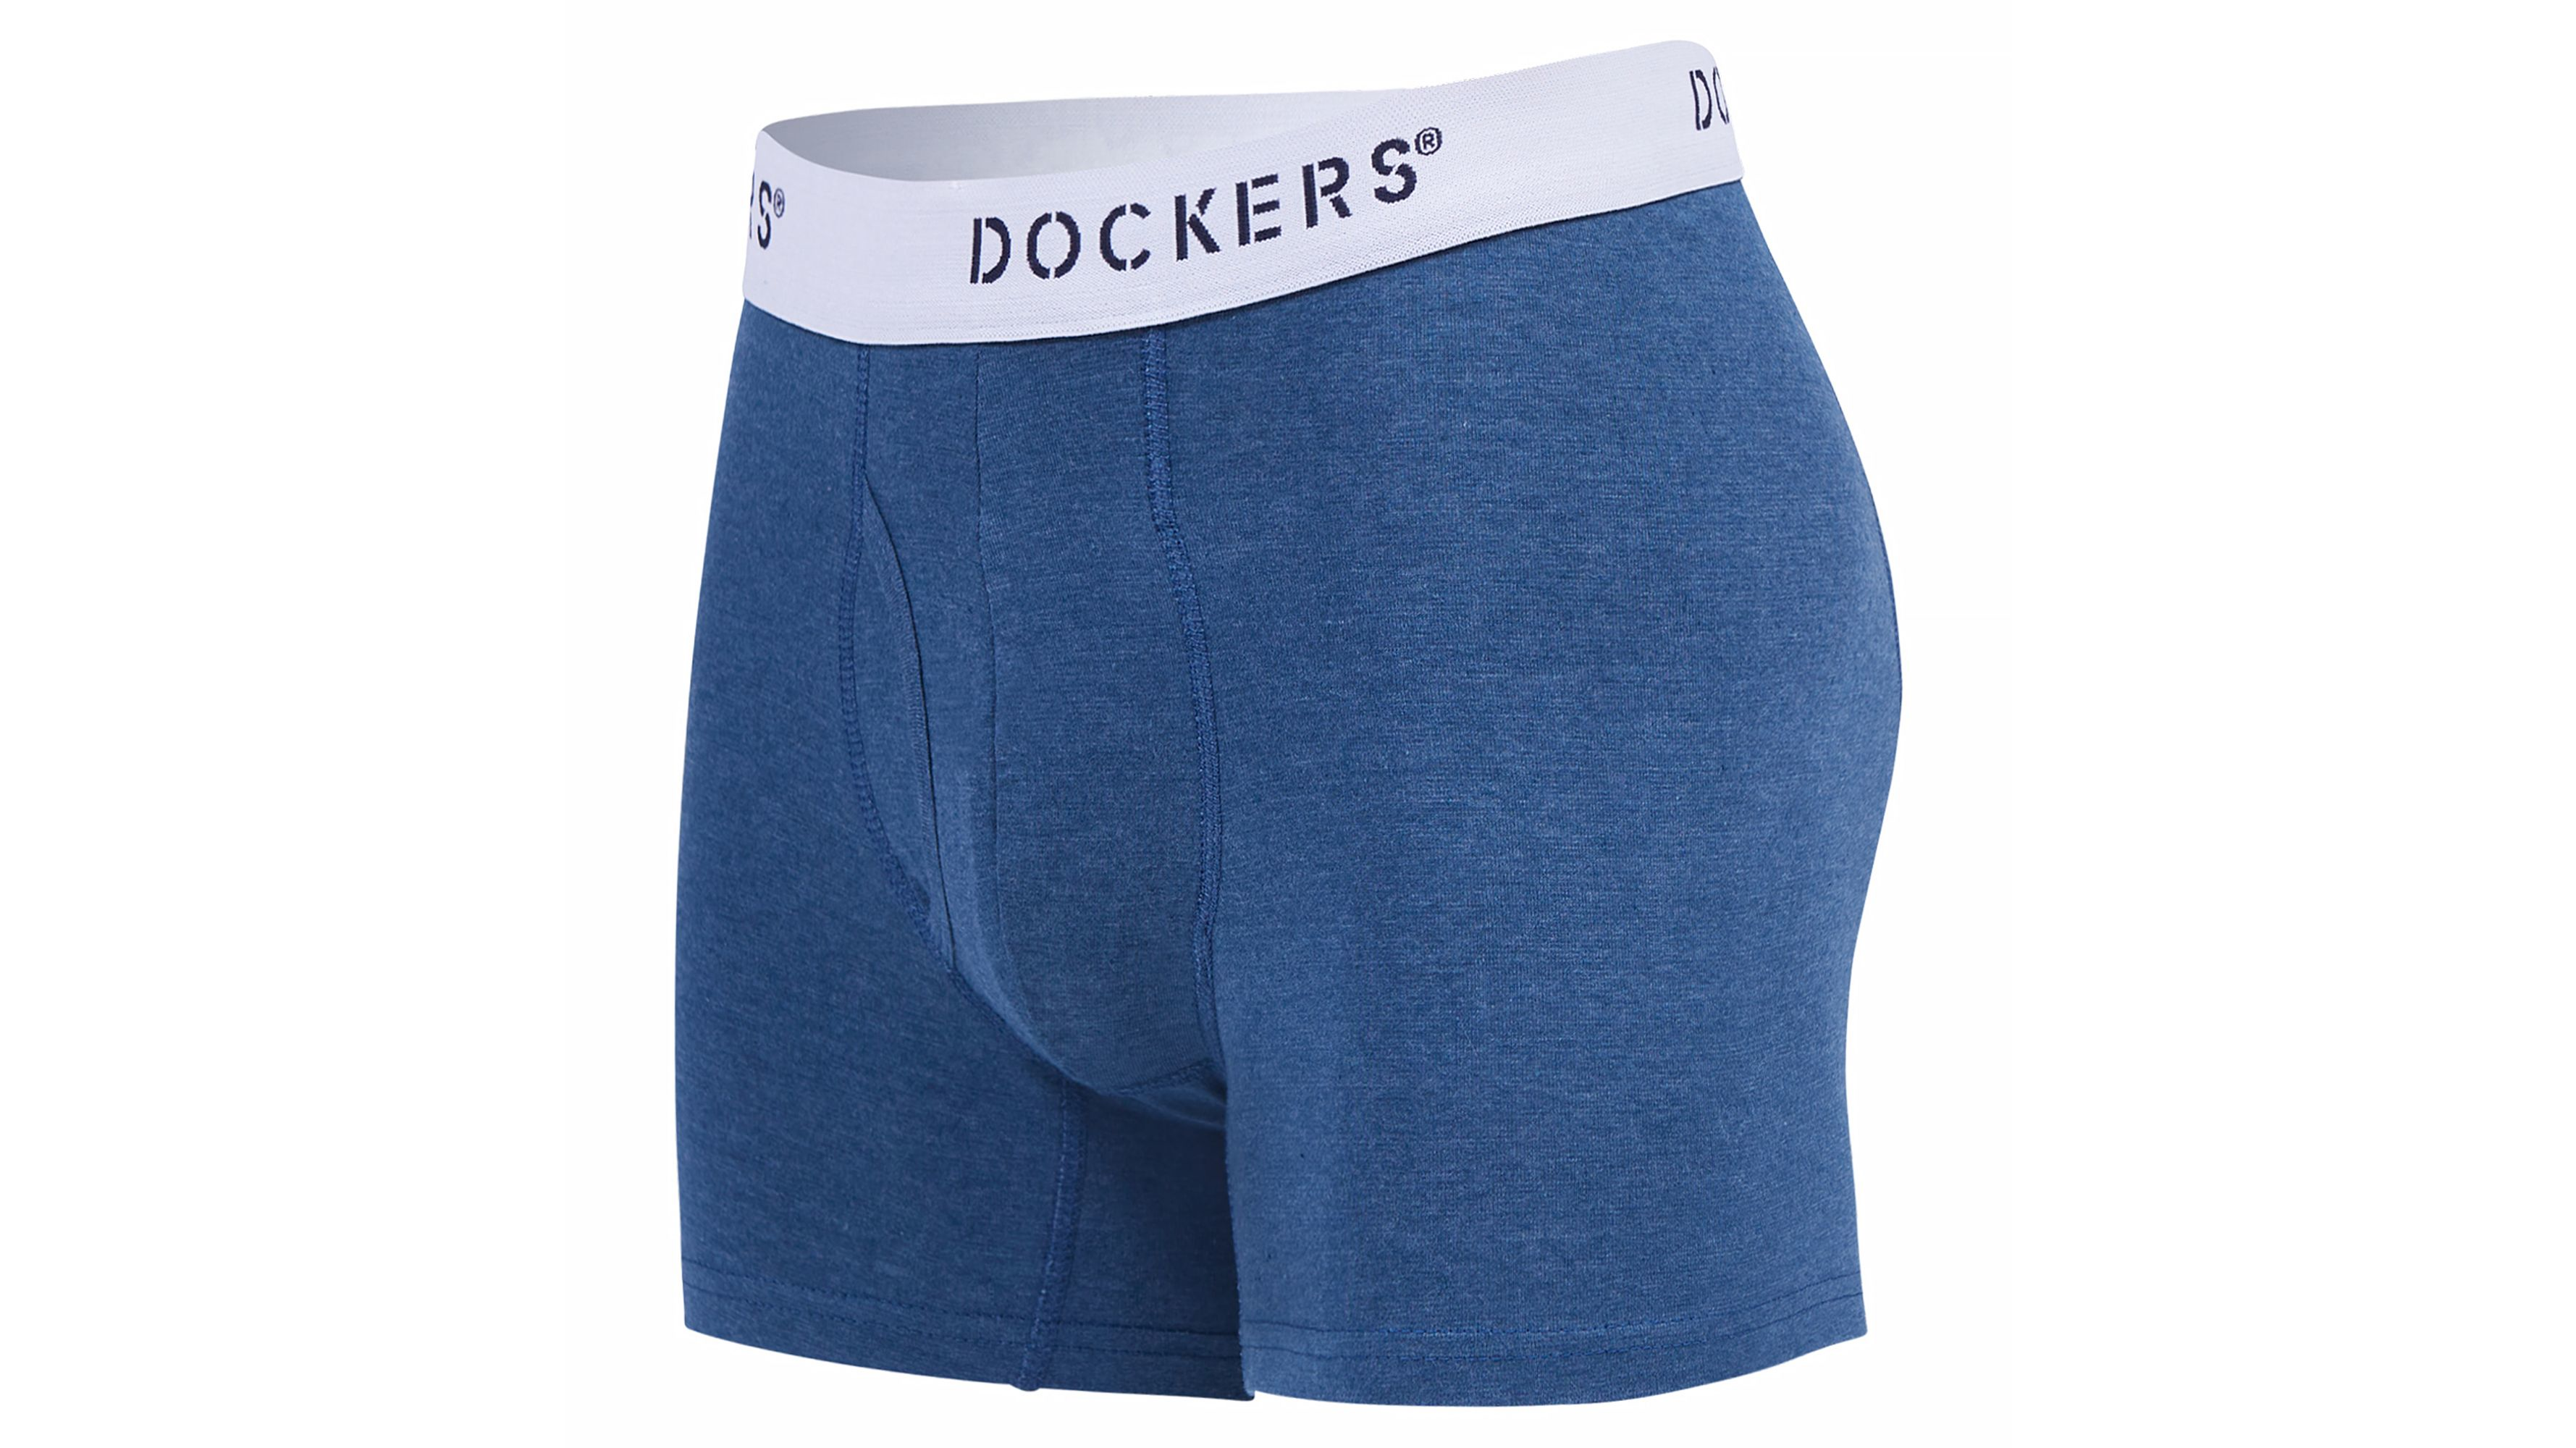 6 MENS DOCKERS COTTON Fly Front Trunks Briefs Boxer Shorts loose fit size  S- XL